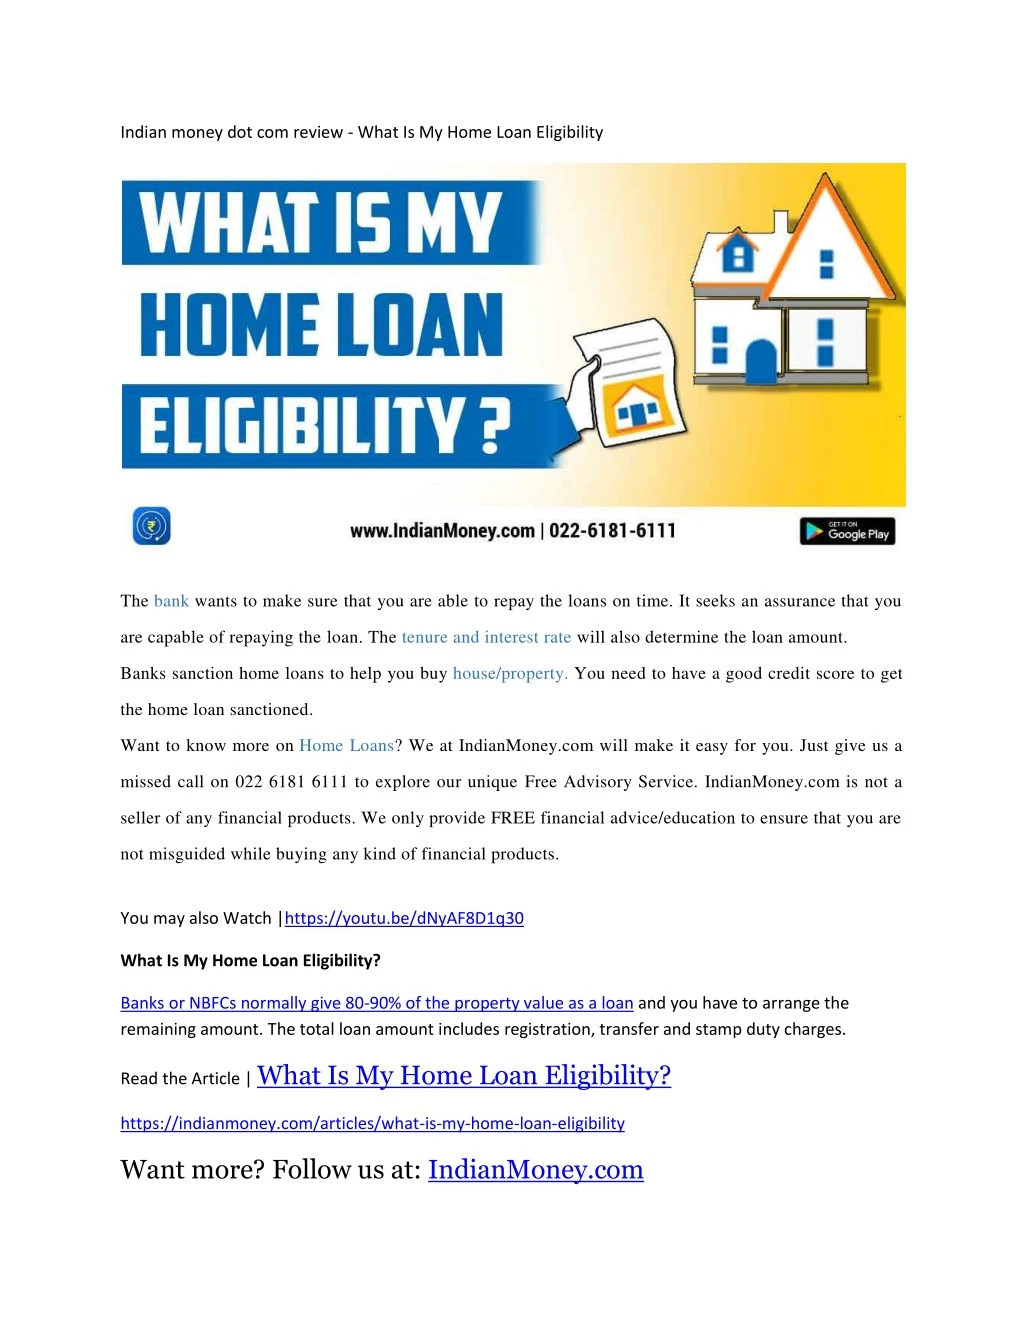 indian money dot com review what is my home loan